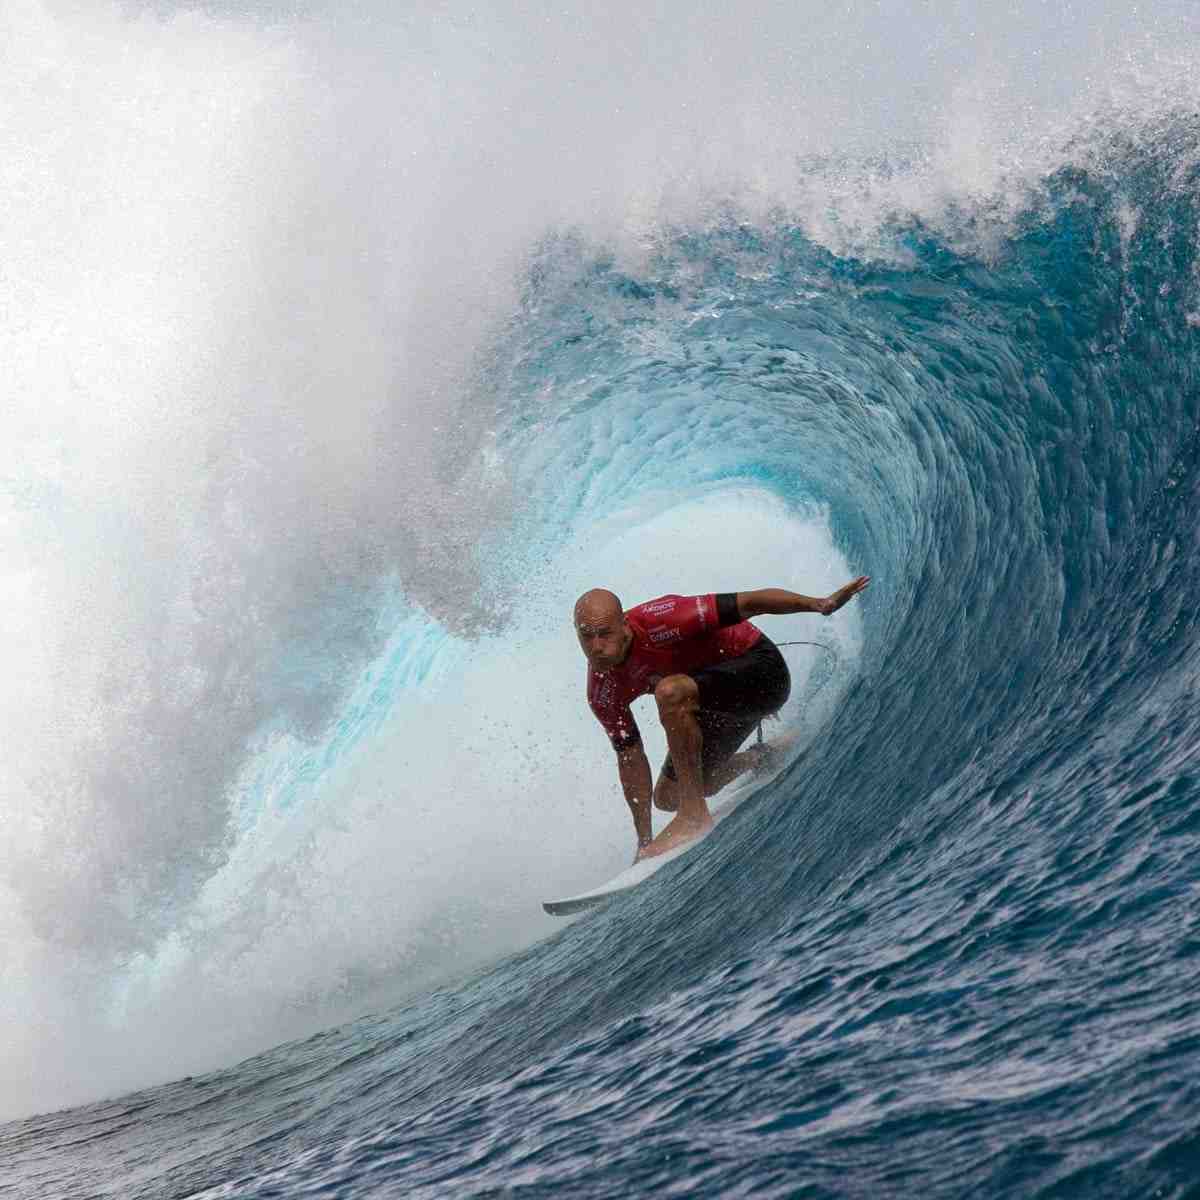 Who has won the most surfing world titles?